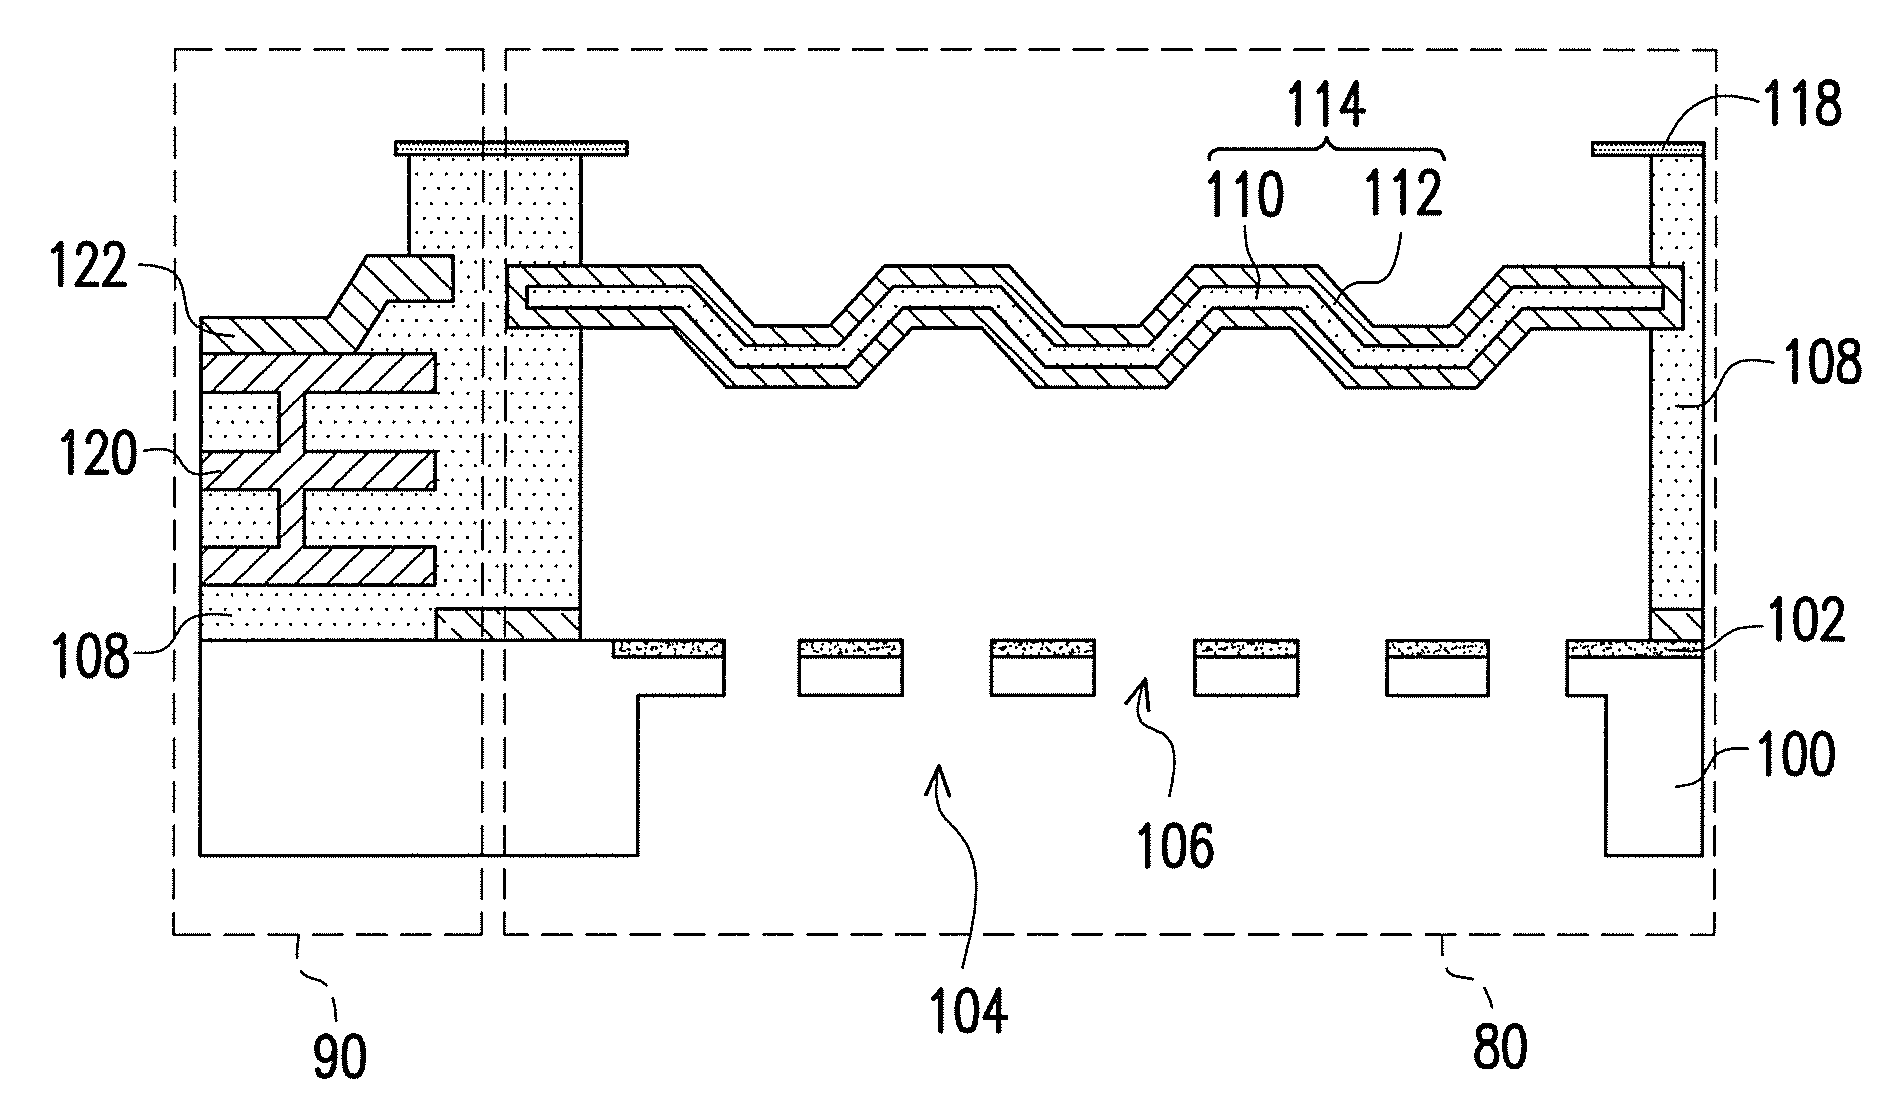 CMOS microelectromechanical system (MEMS) device and fabrication method thereof